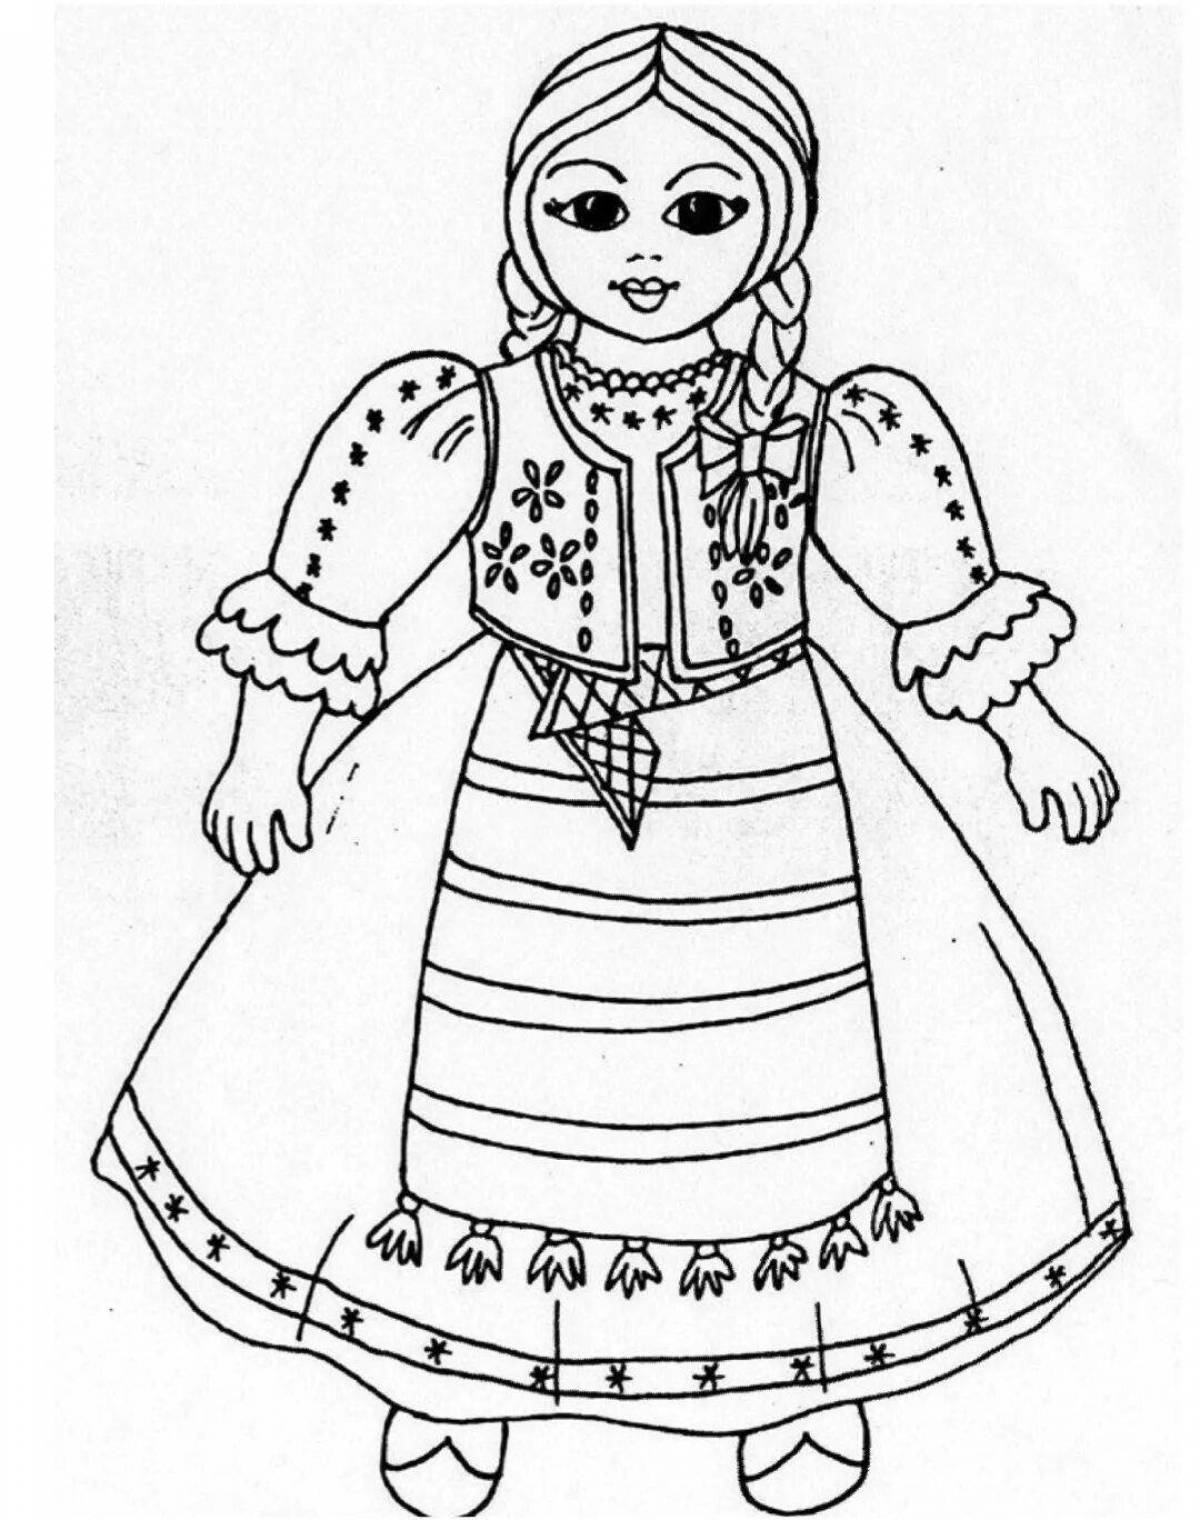 Coloring book glowing Russian folk costumes for children